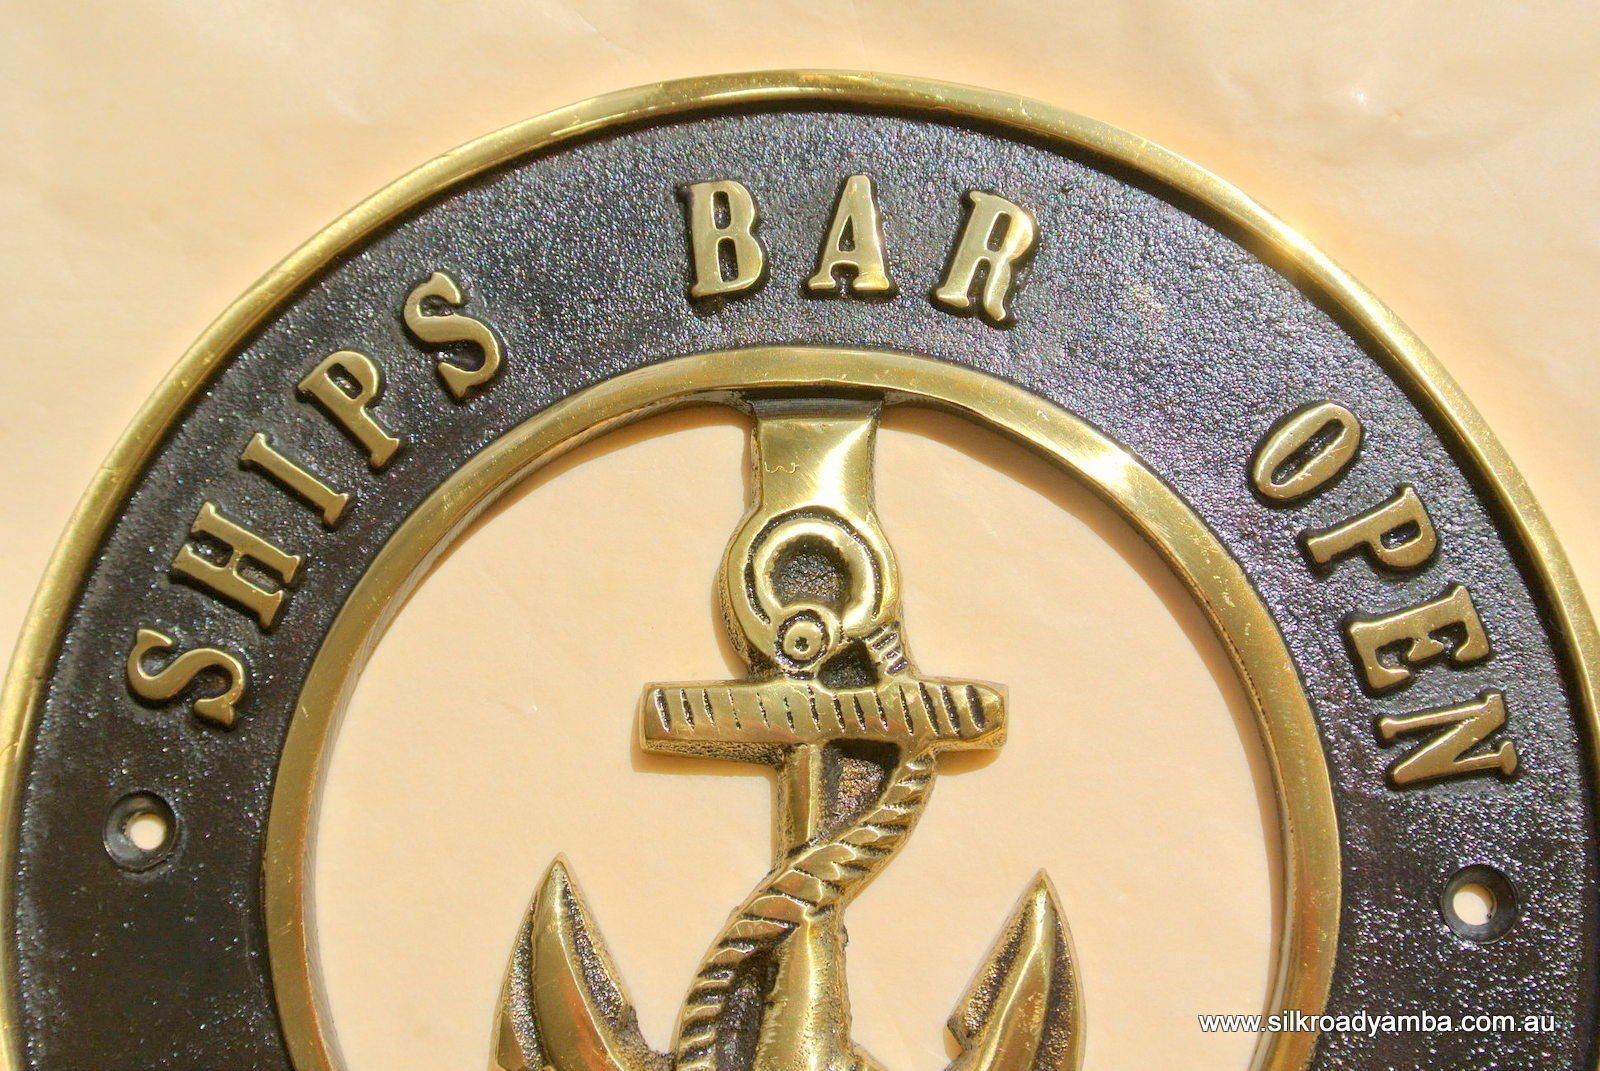 Gifts man cave sign solid BRASS SIGN Ships Bar Open 6.1/2  ship Anchor  decor heavy gift boat, brass wall sign cast heavy brass nautical